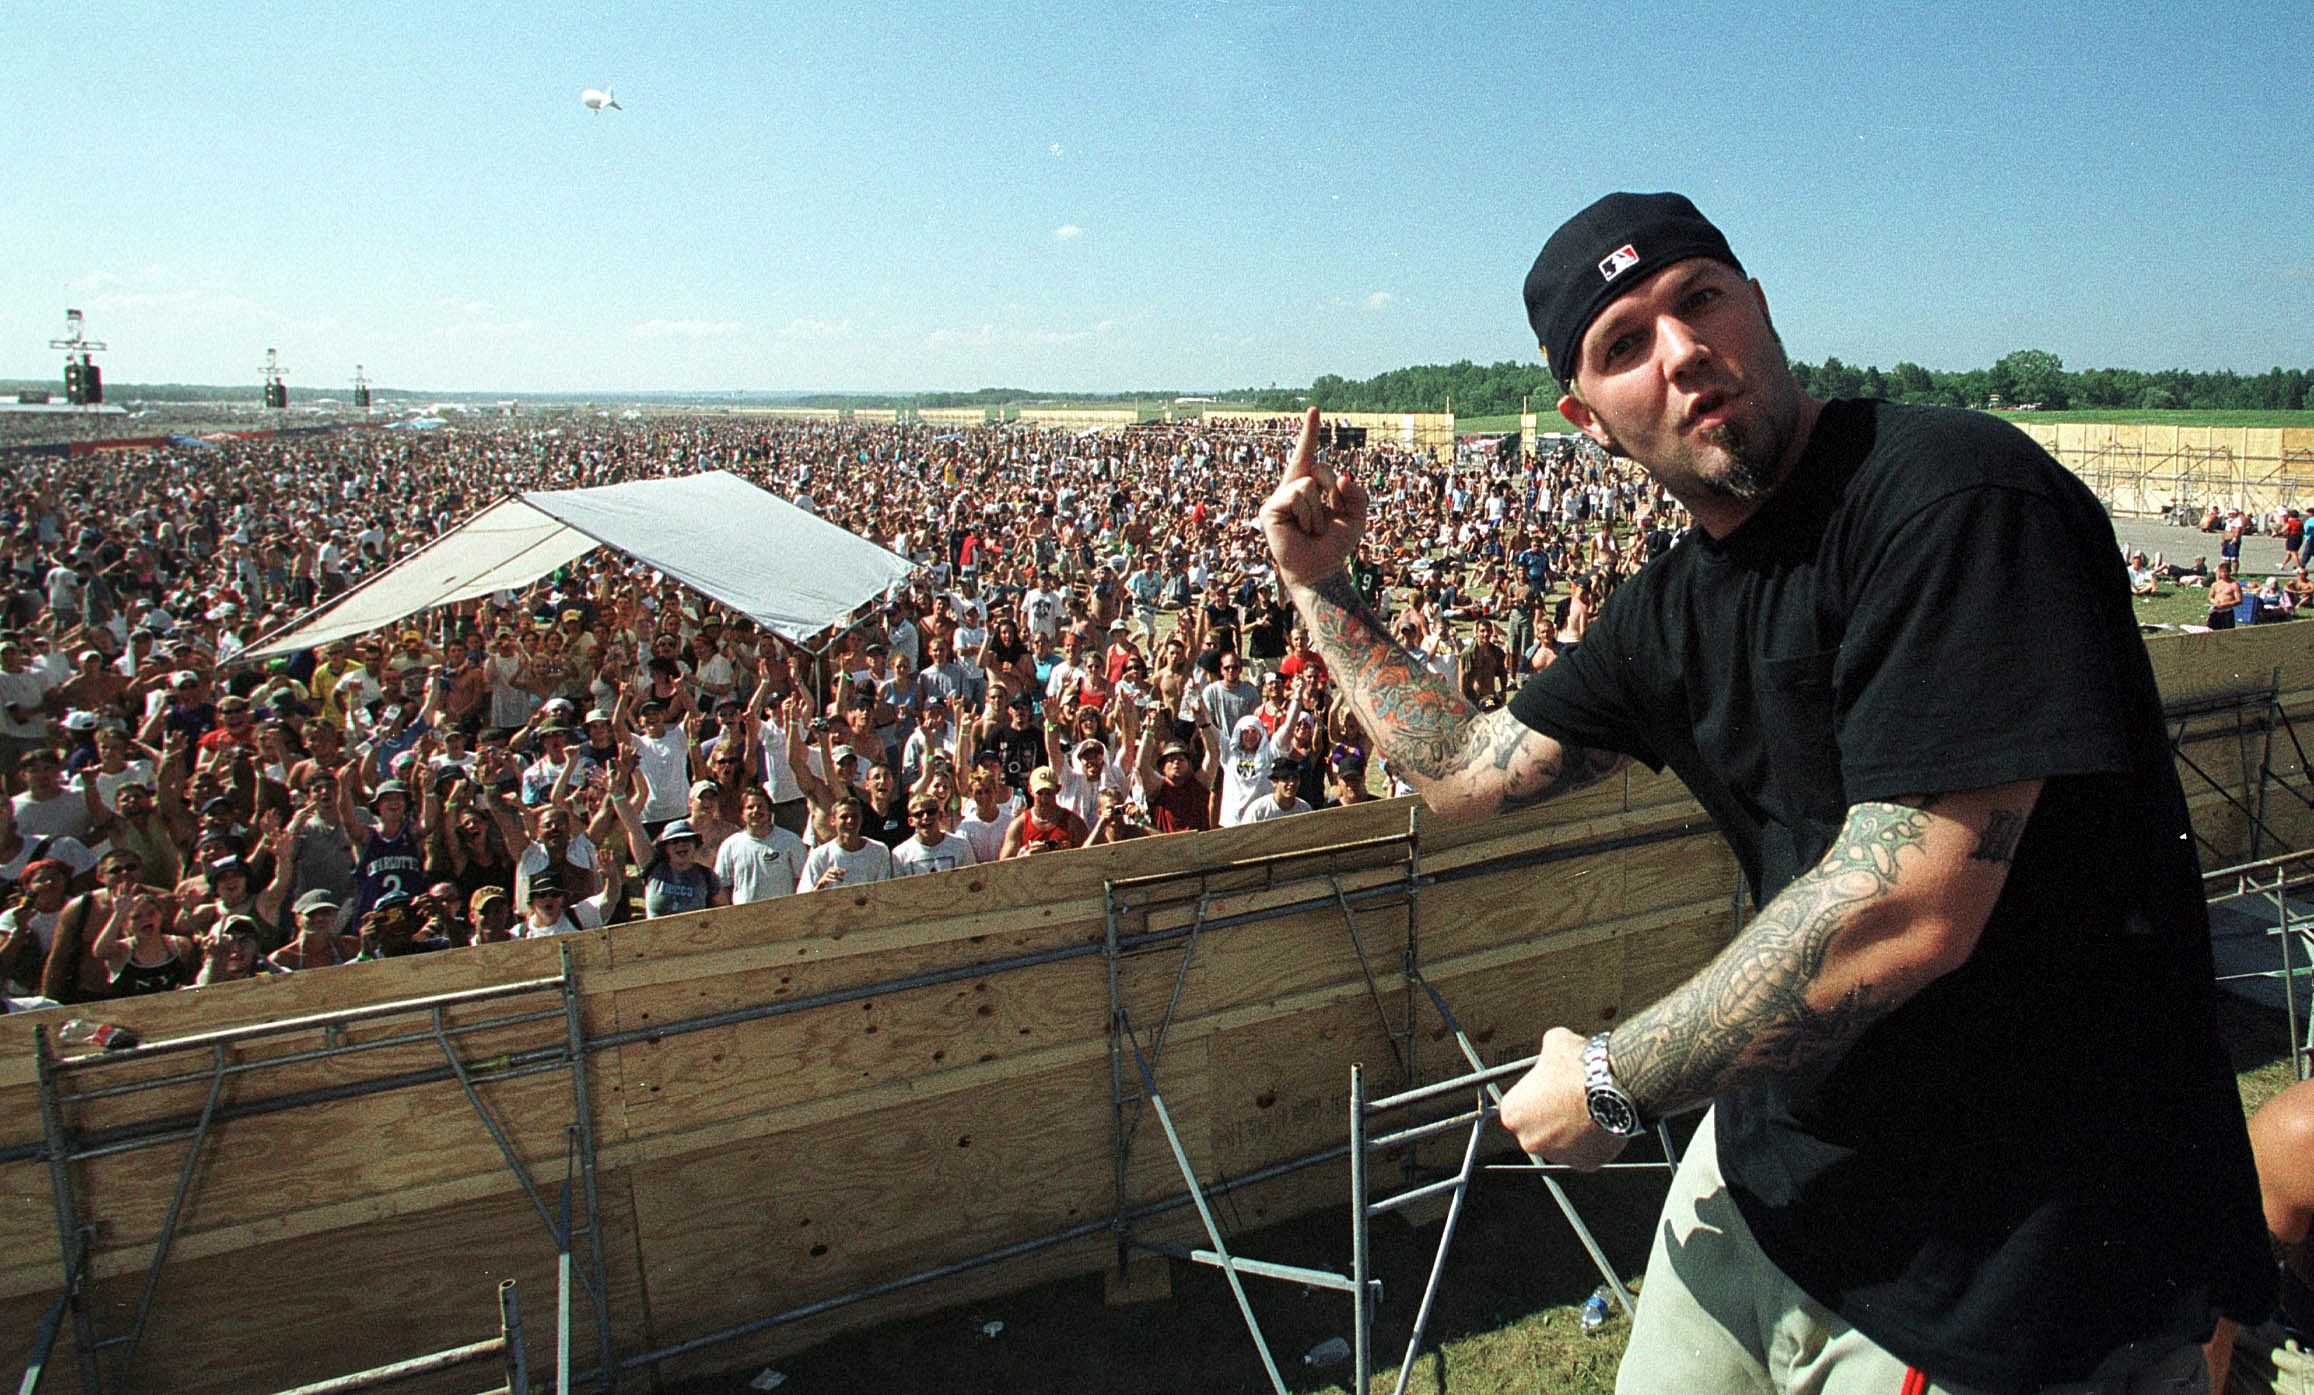 Please Criticise Woodstock 99 But Leave The Nu Metal Clothes Alone